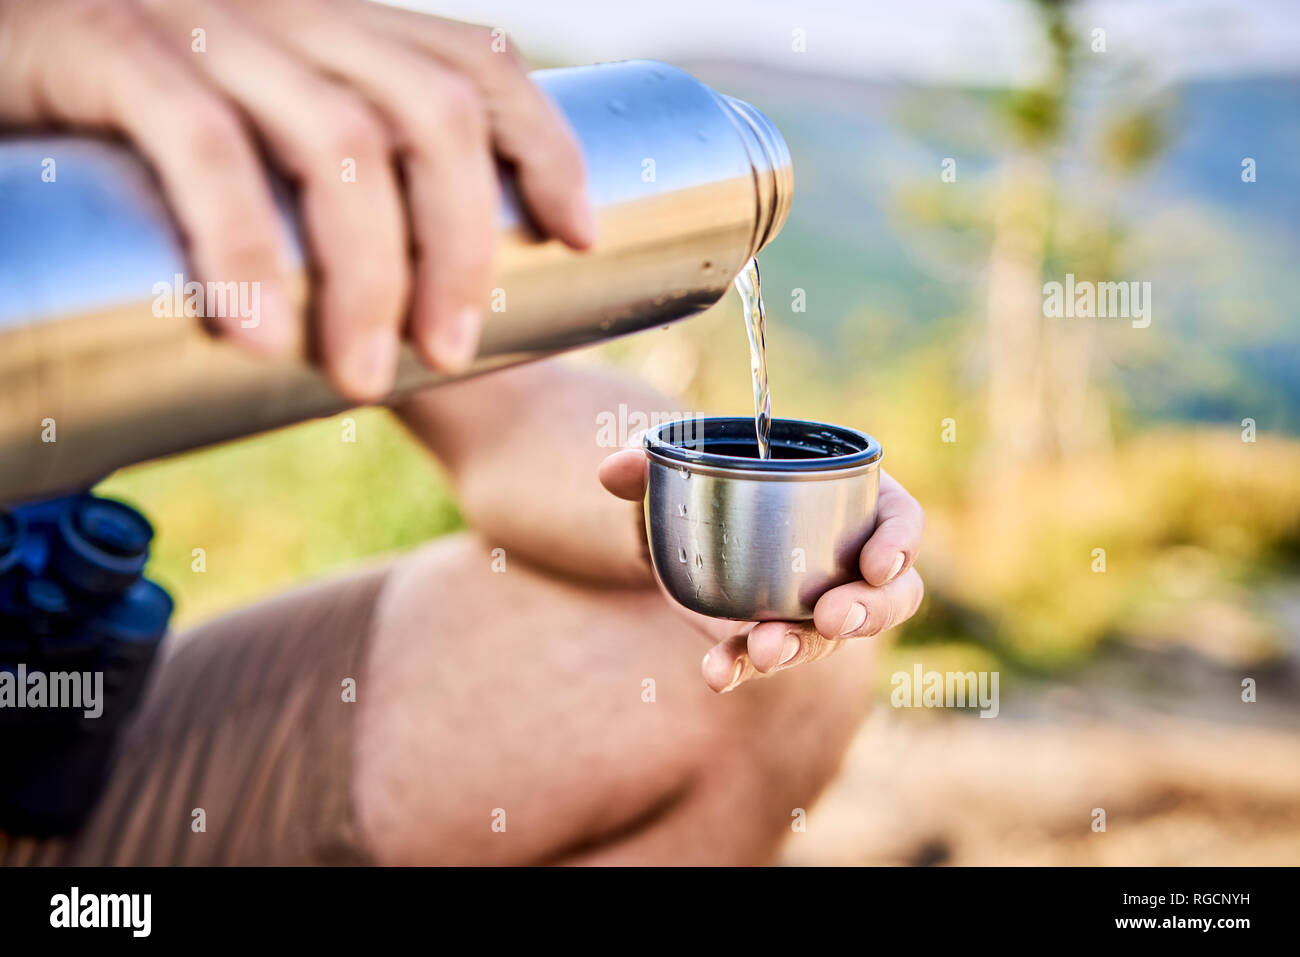 https://c8.alamy.com/comp/RGCNYH/close-up-of-man-during-hiking-trip-pouring-cold-water-from-thermos-flask-RGCNYH.jpg